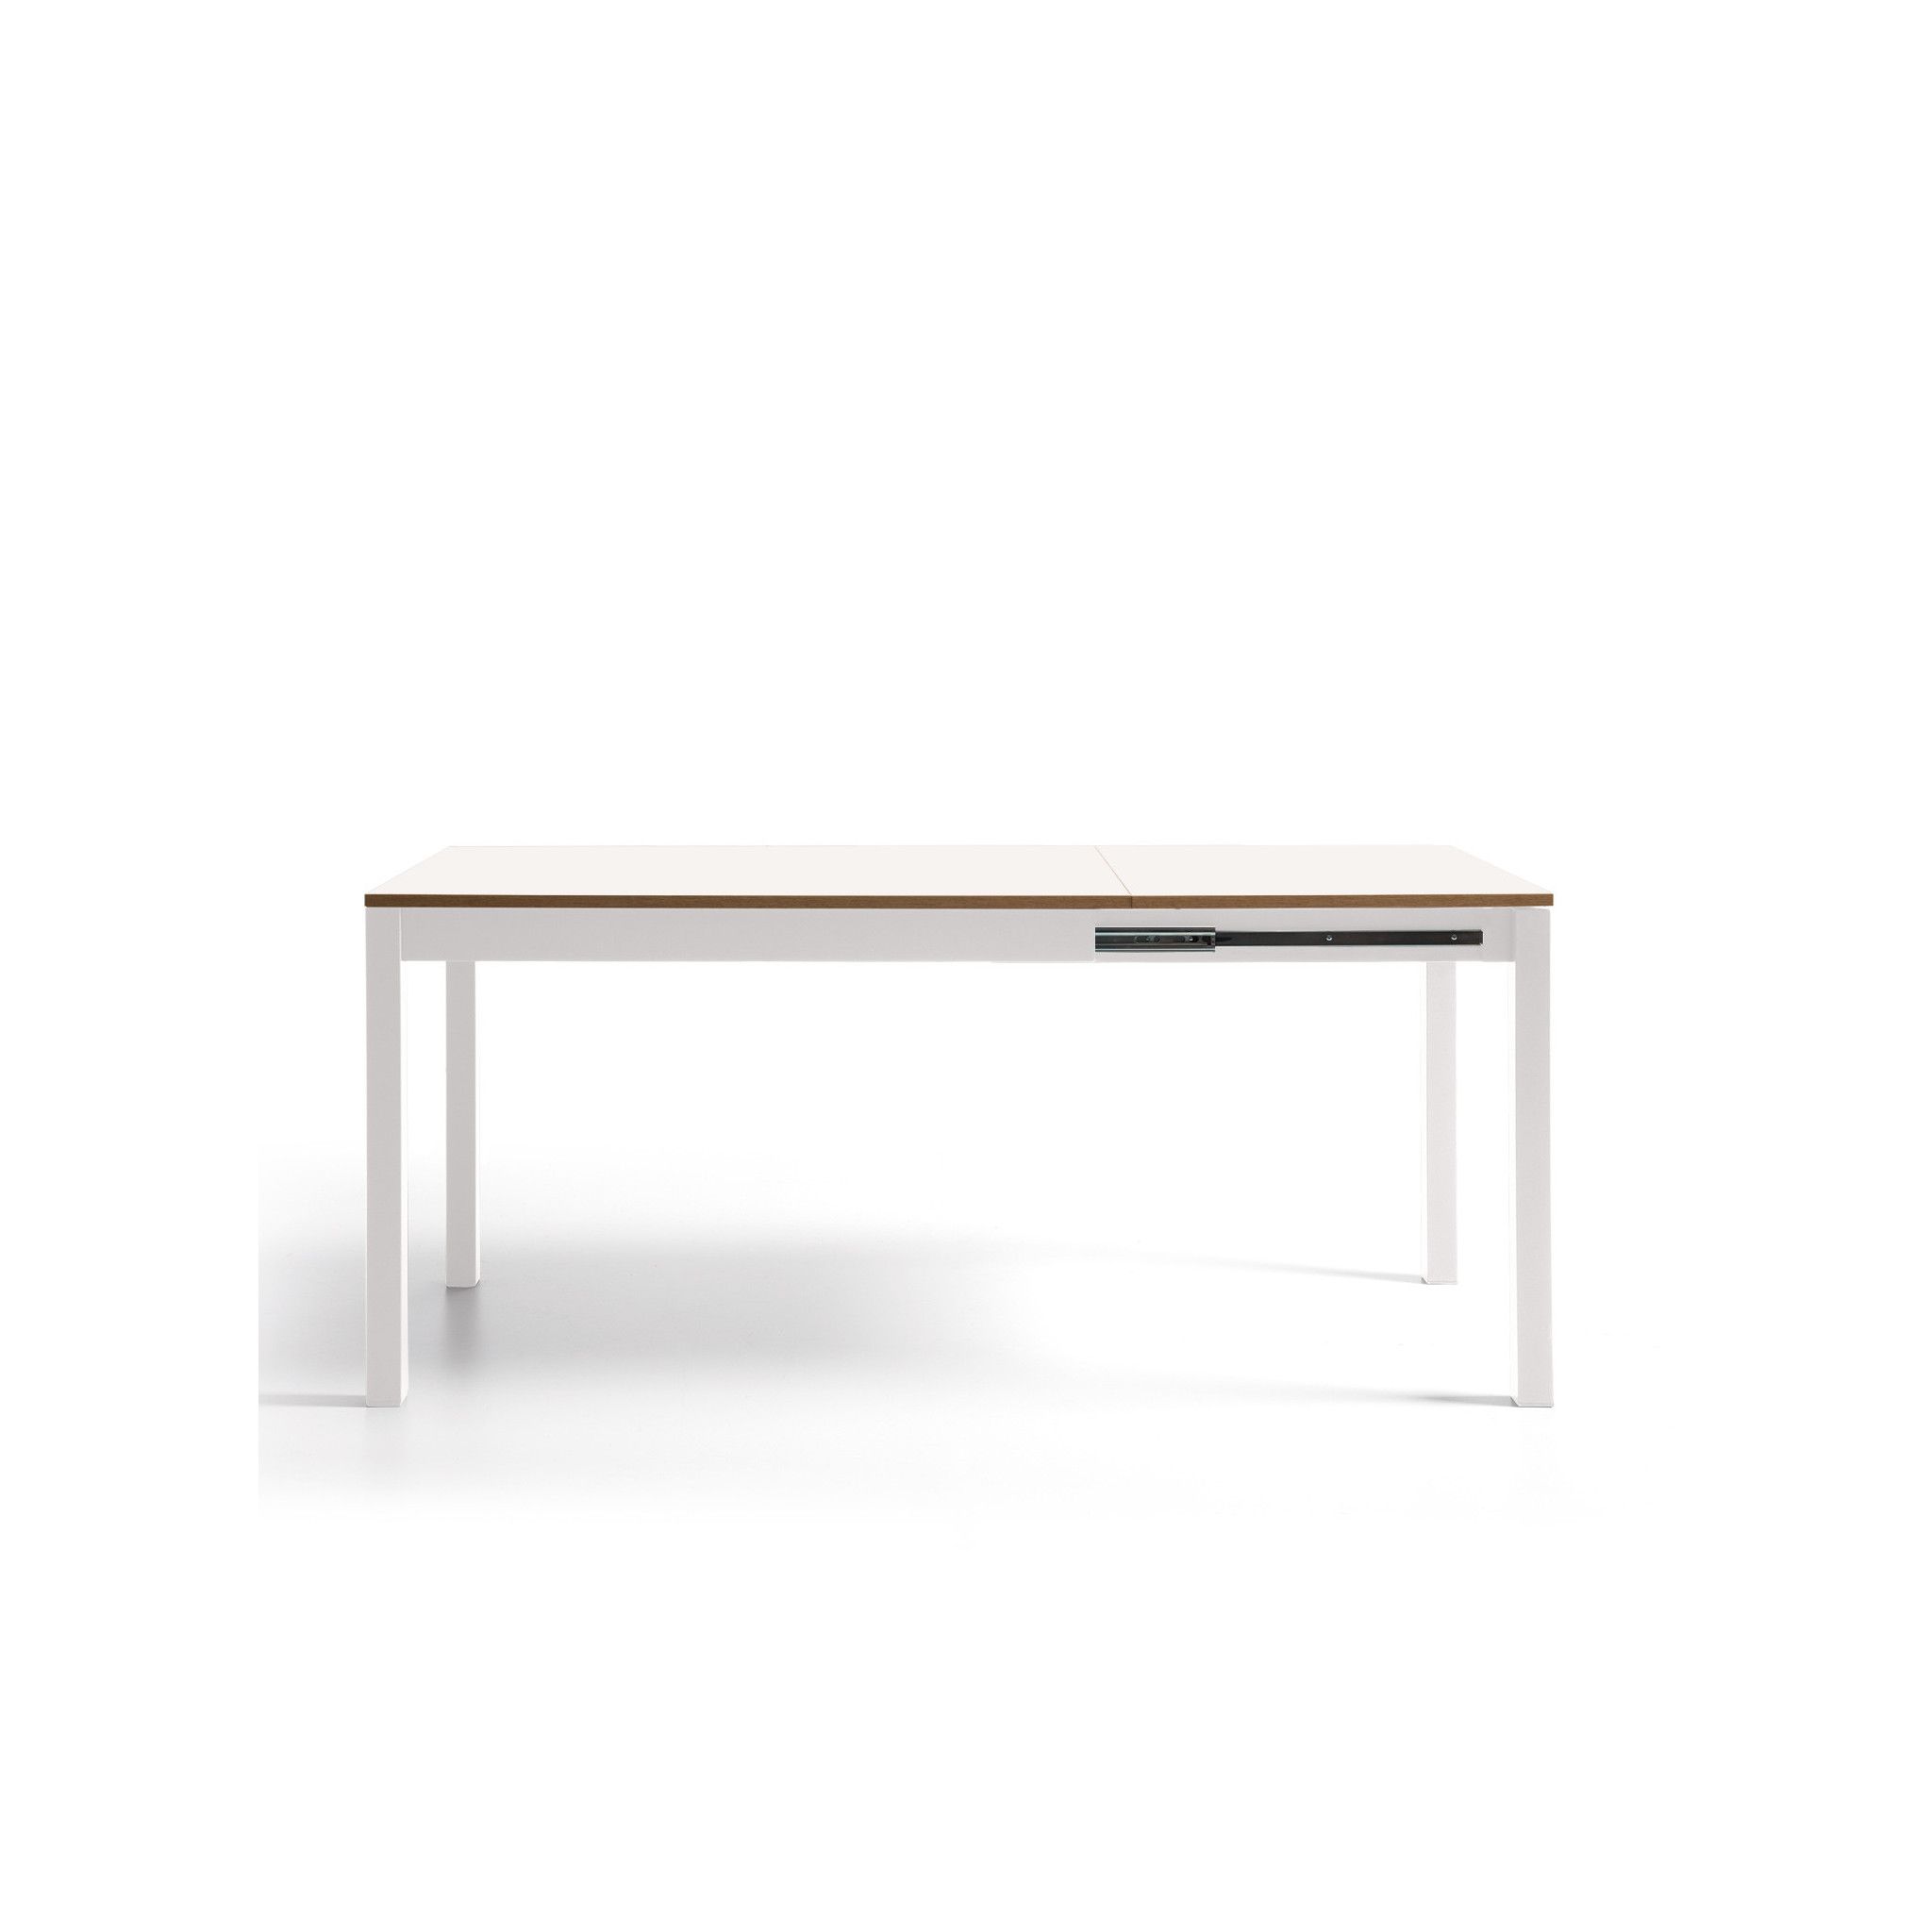 TABLE PALMA BLANCHE EXTENSIBLE